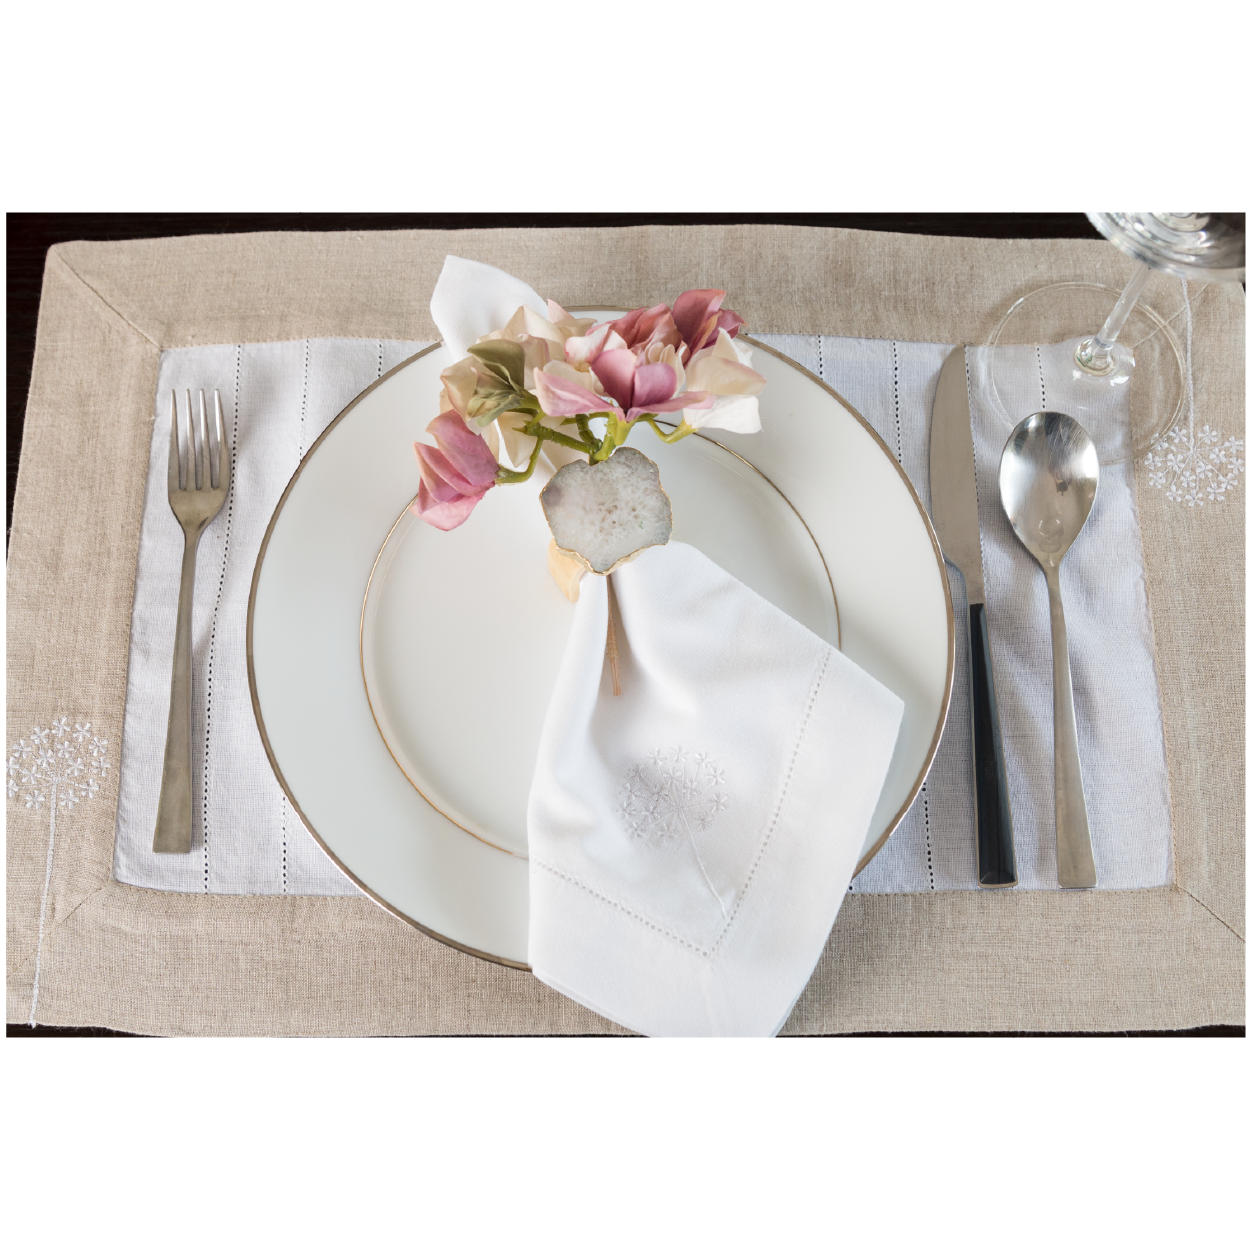 Bloom Place-mats (Set of 6)